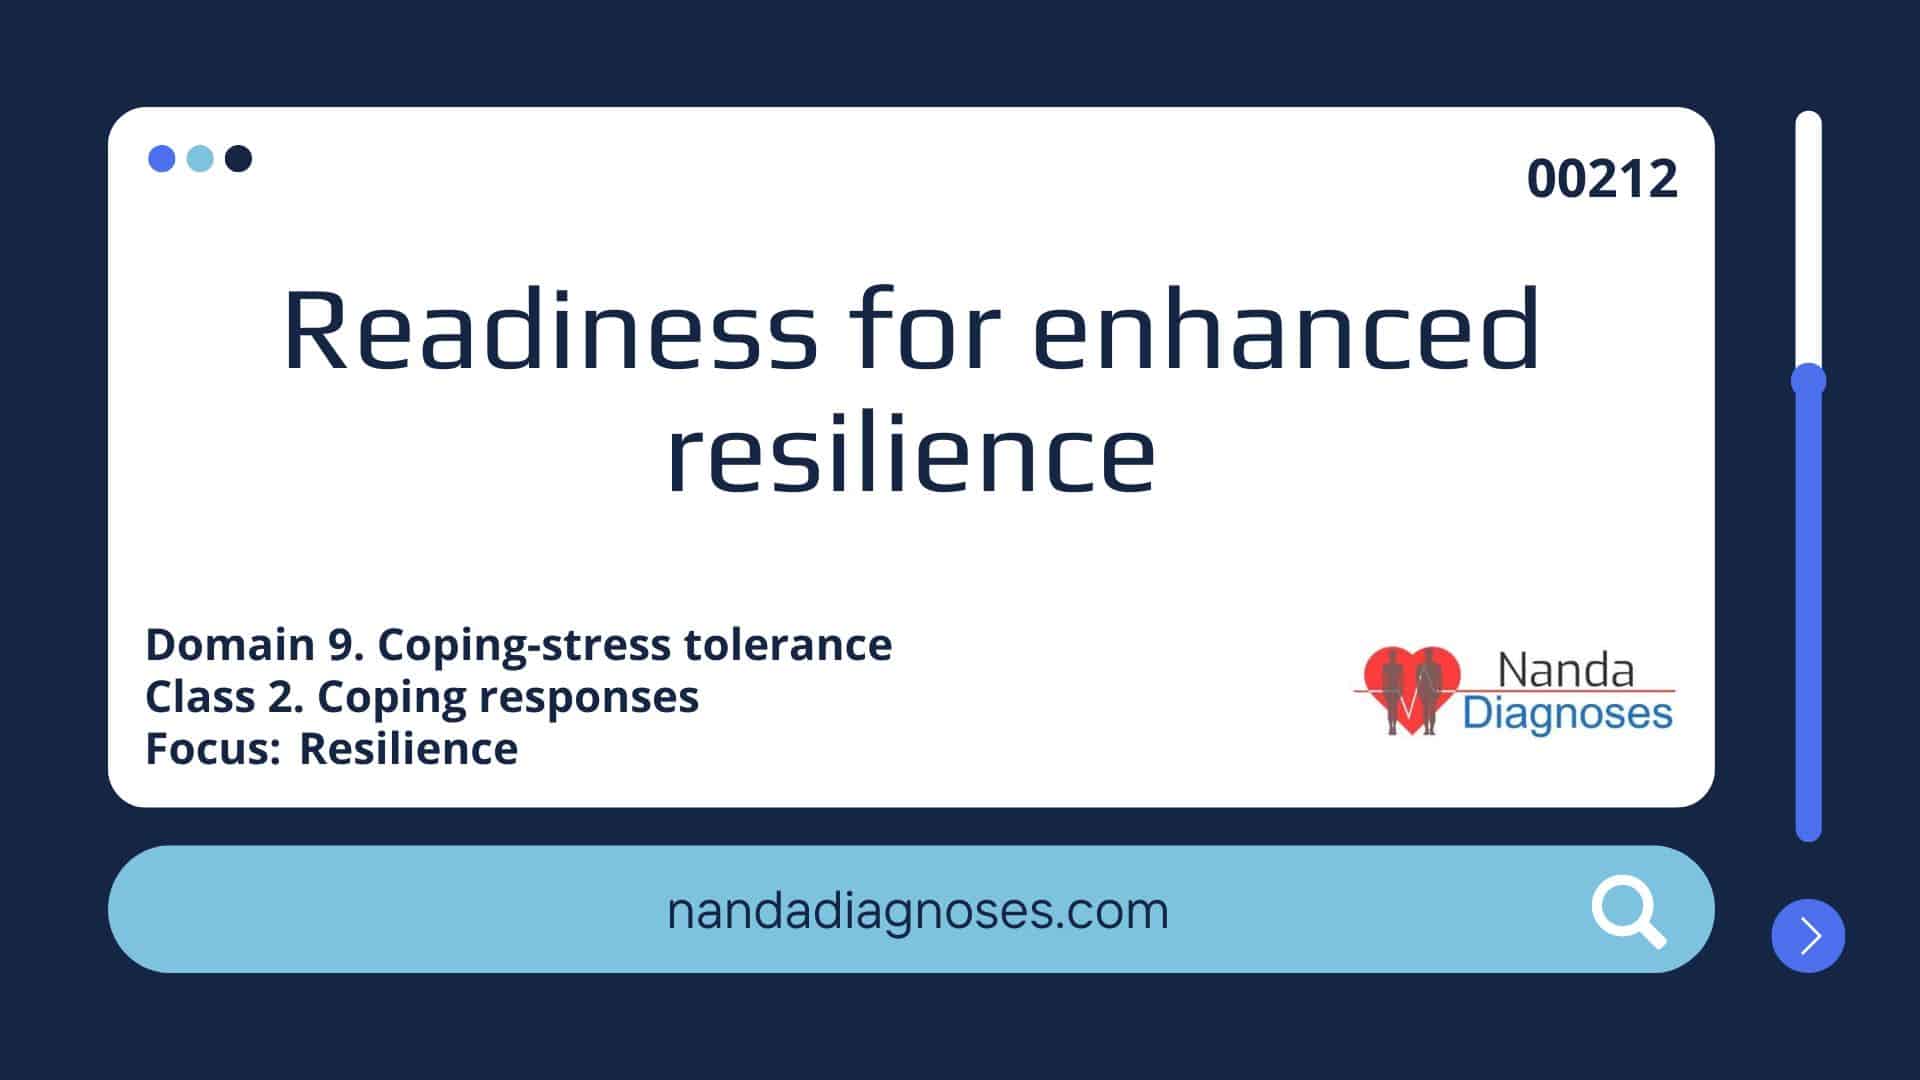 Readiness for enhanced resilience